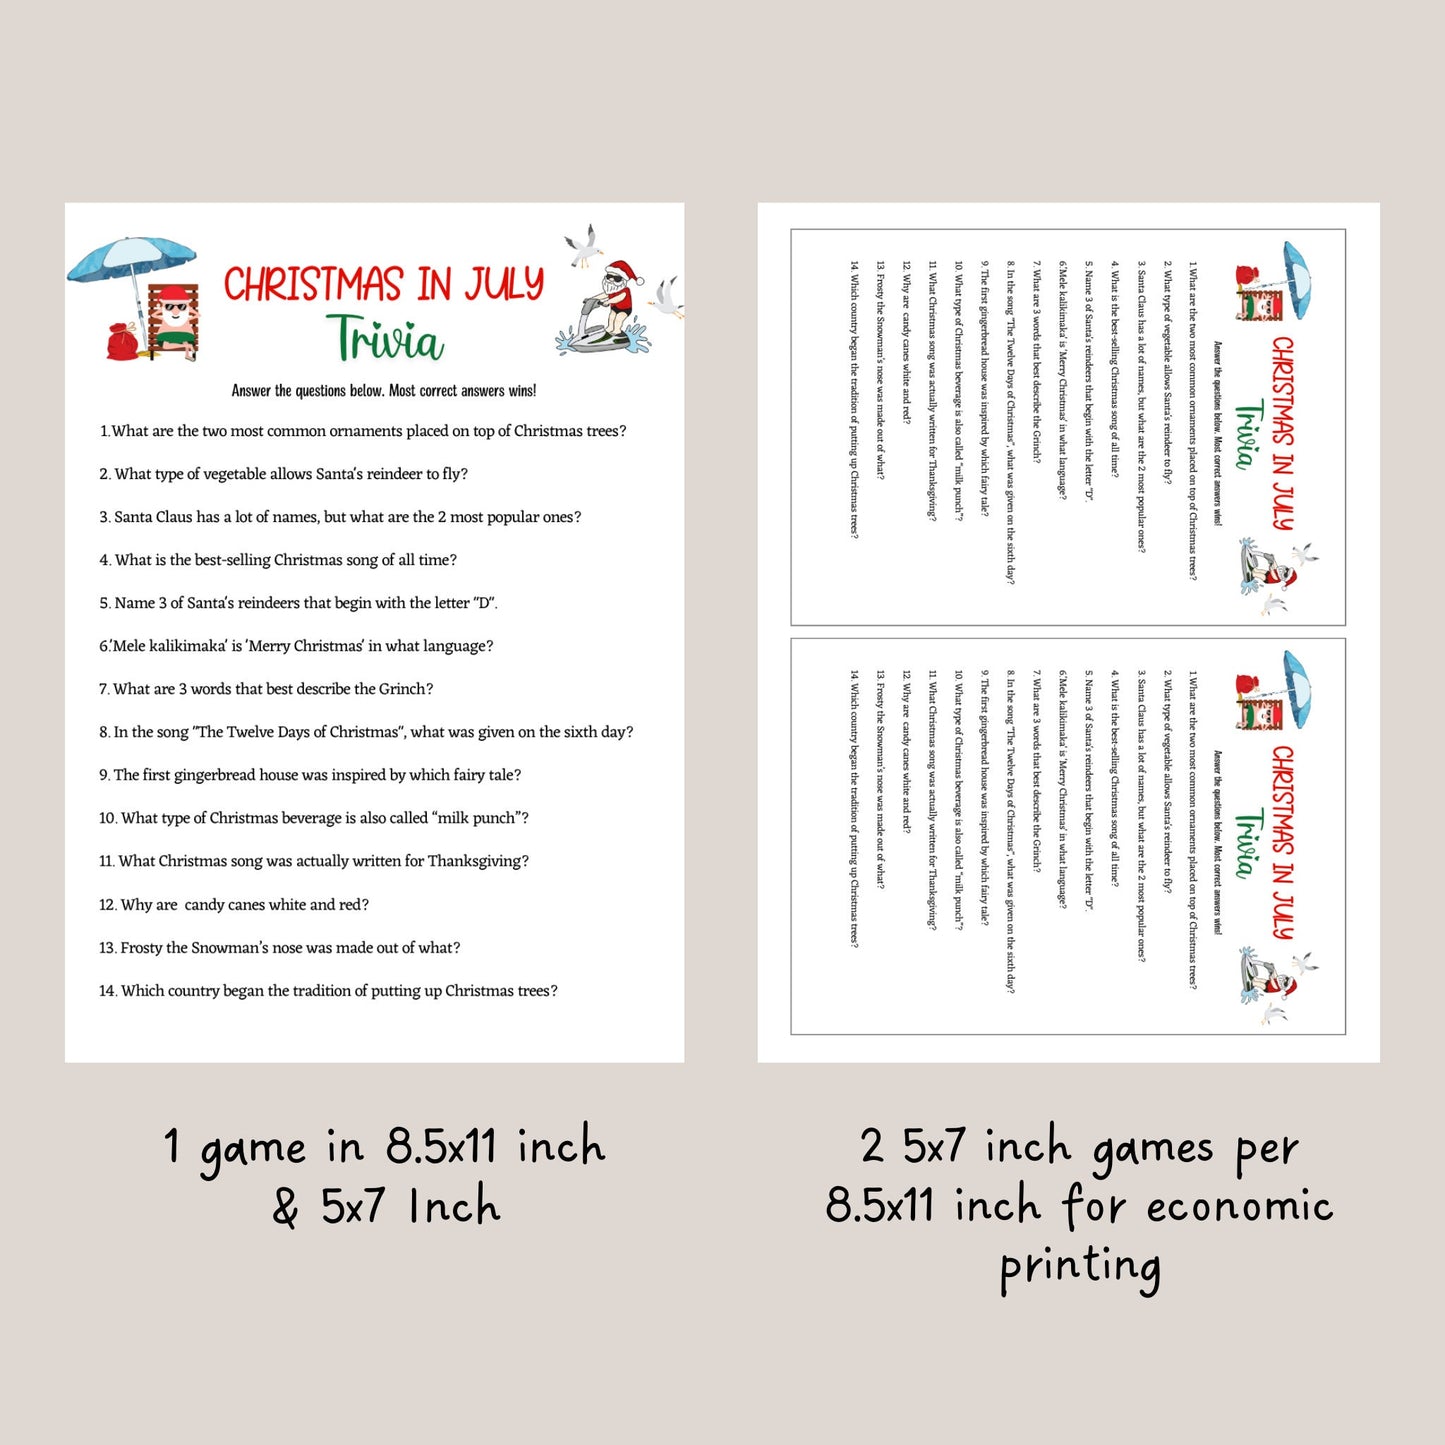 Christmas in July Trivia Game Printable, Summer Christmas Party, Tropical Party Game Kids & Adults, Fun Family Activity, Office Party Ideas